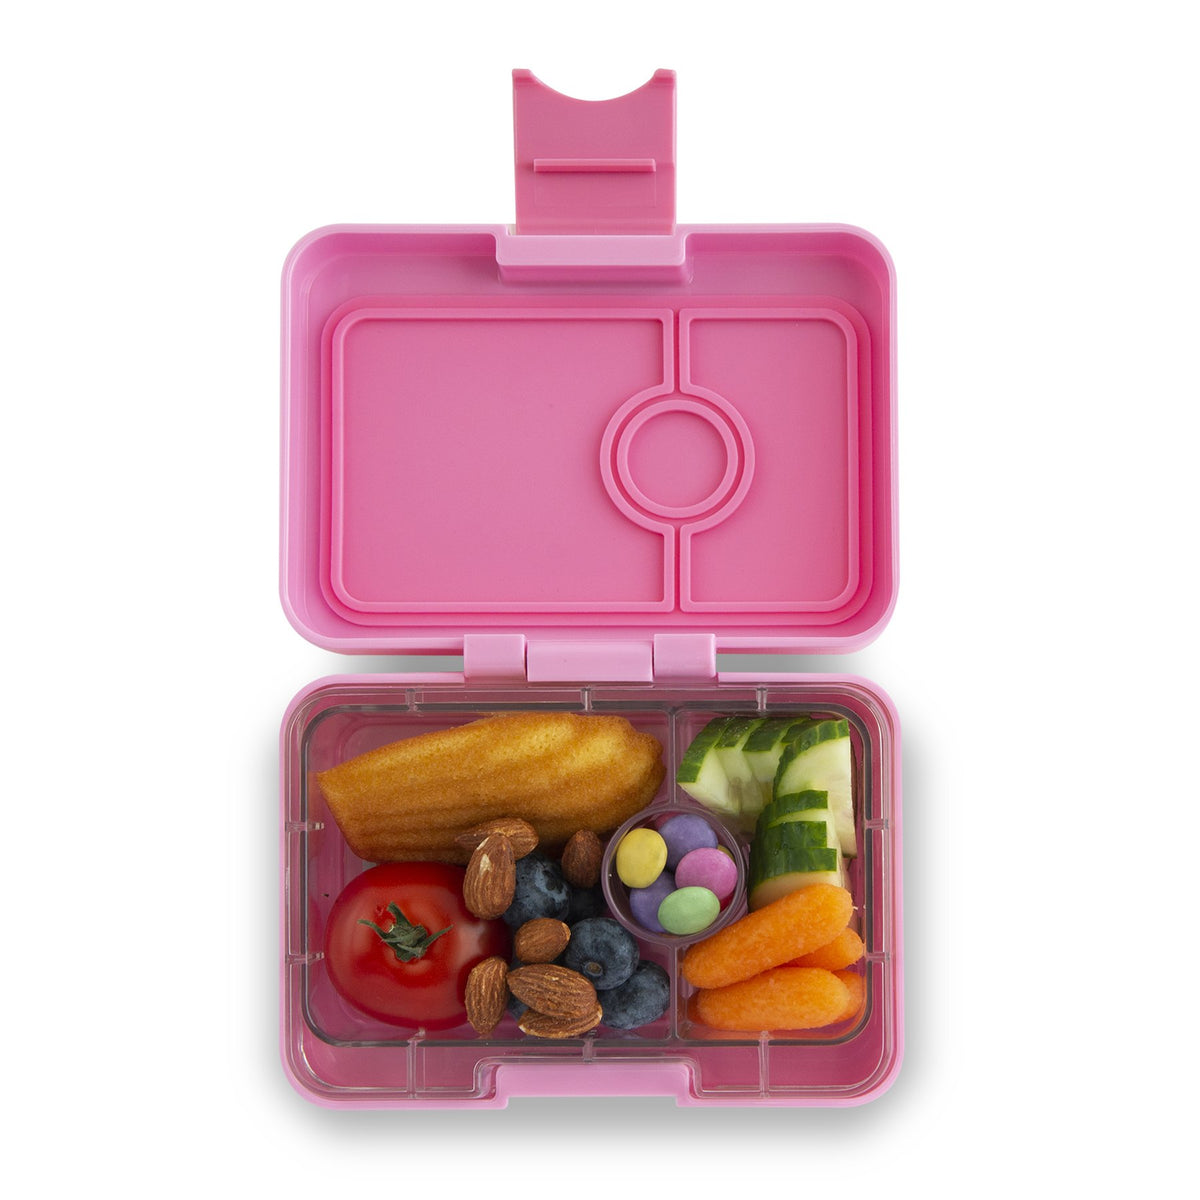 Yumbox Mini Snack Stardust Pink 3 Compartment Lunch Box